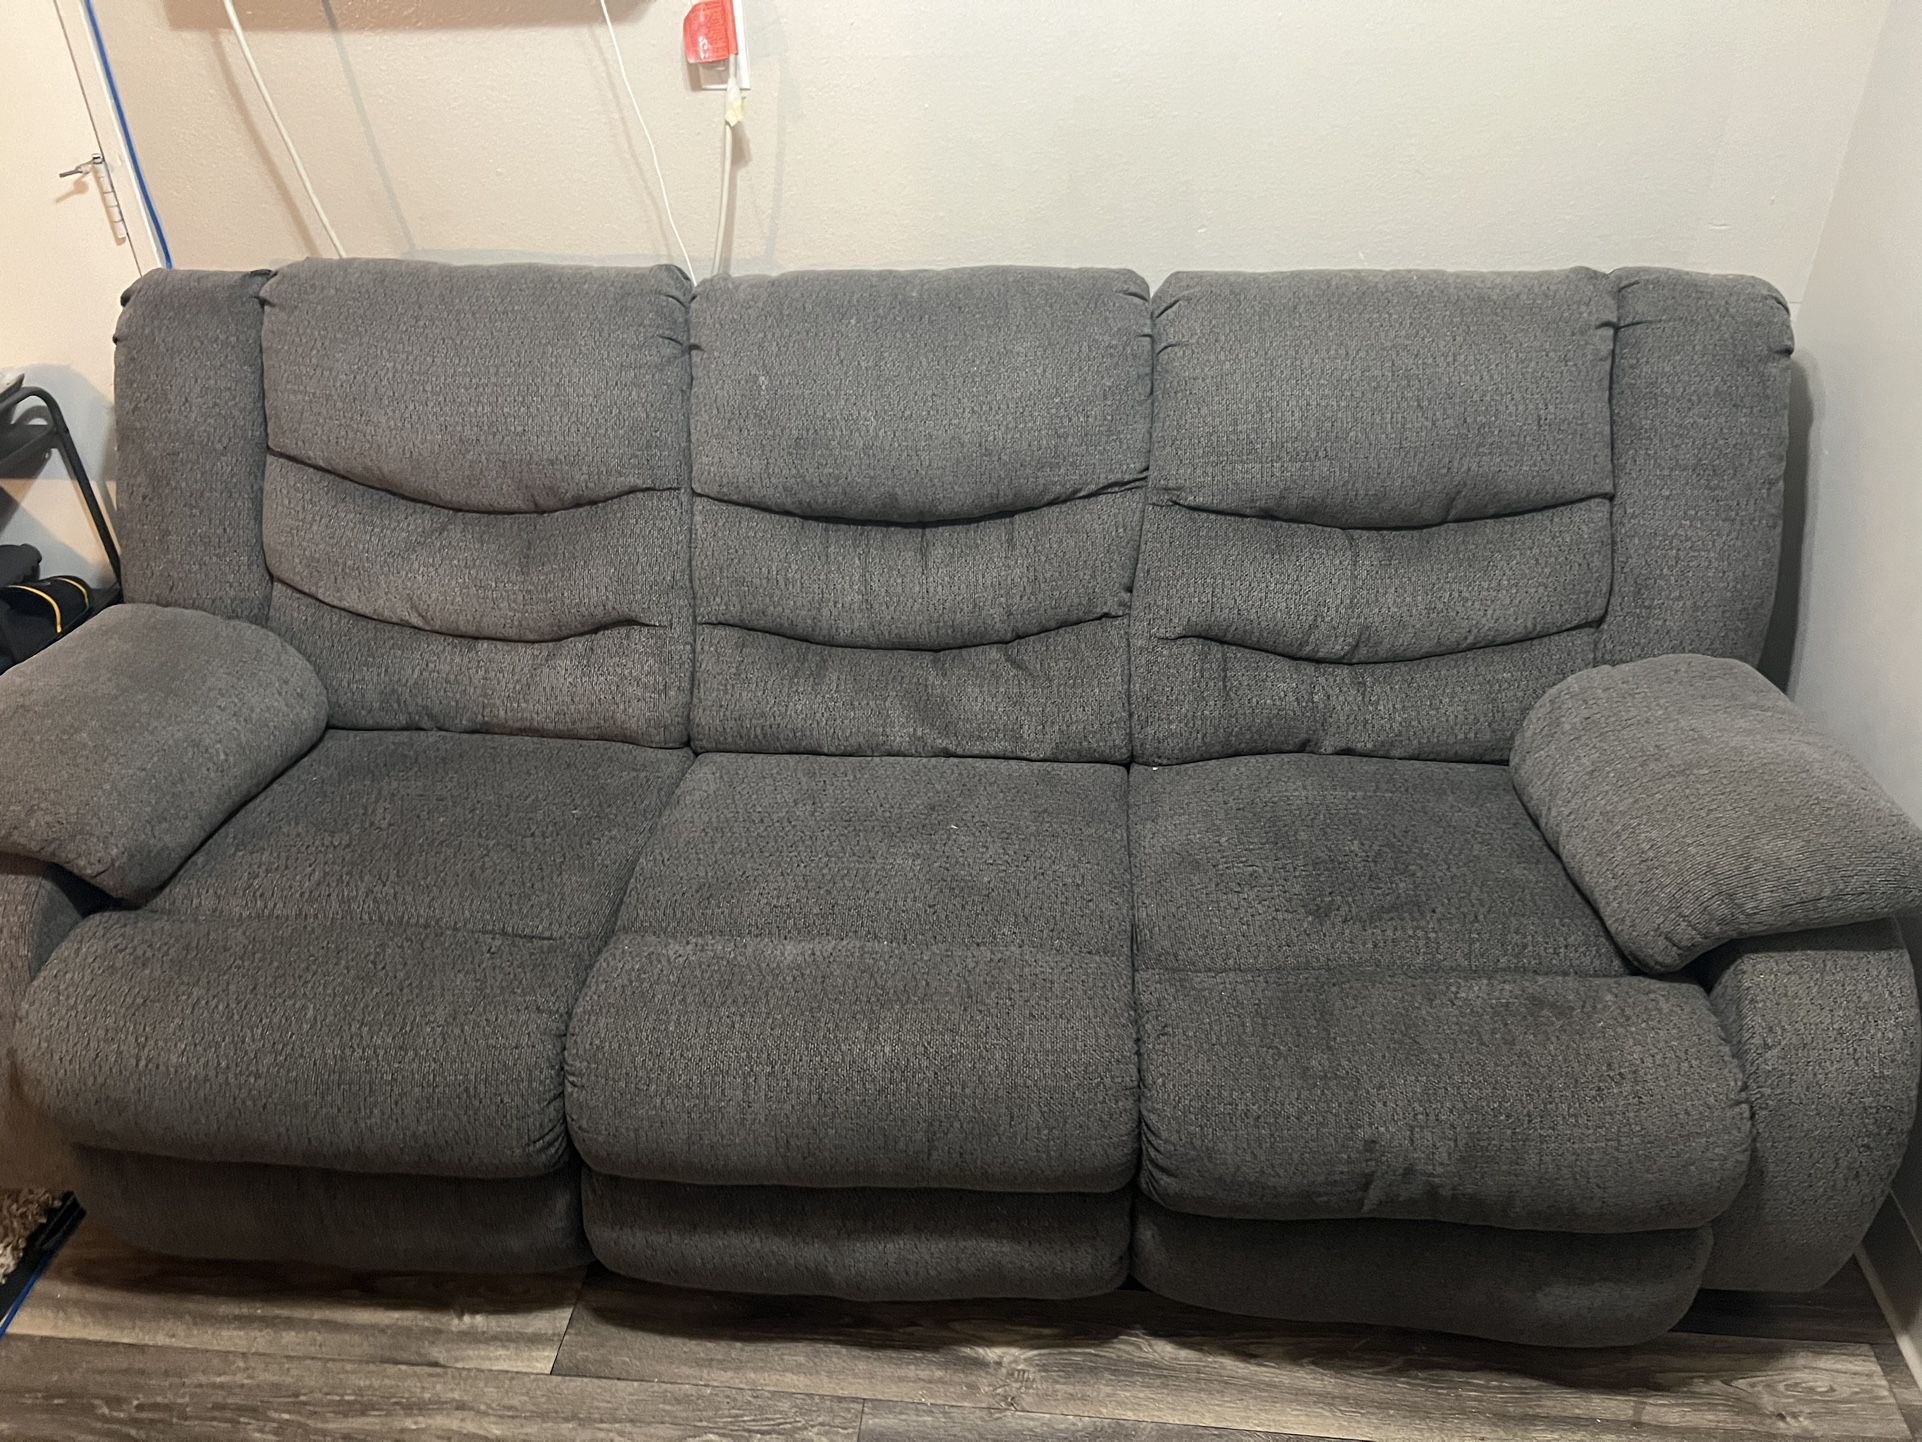 Used Couch 